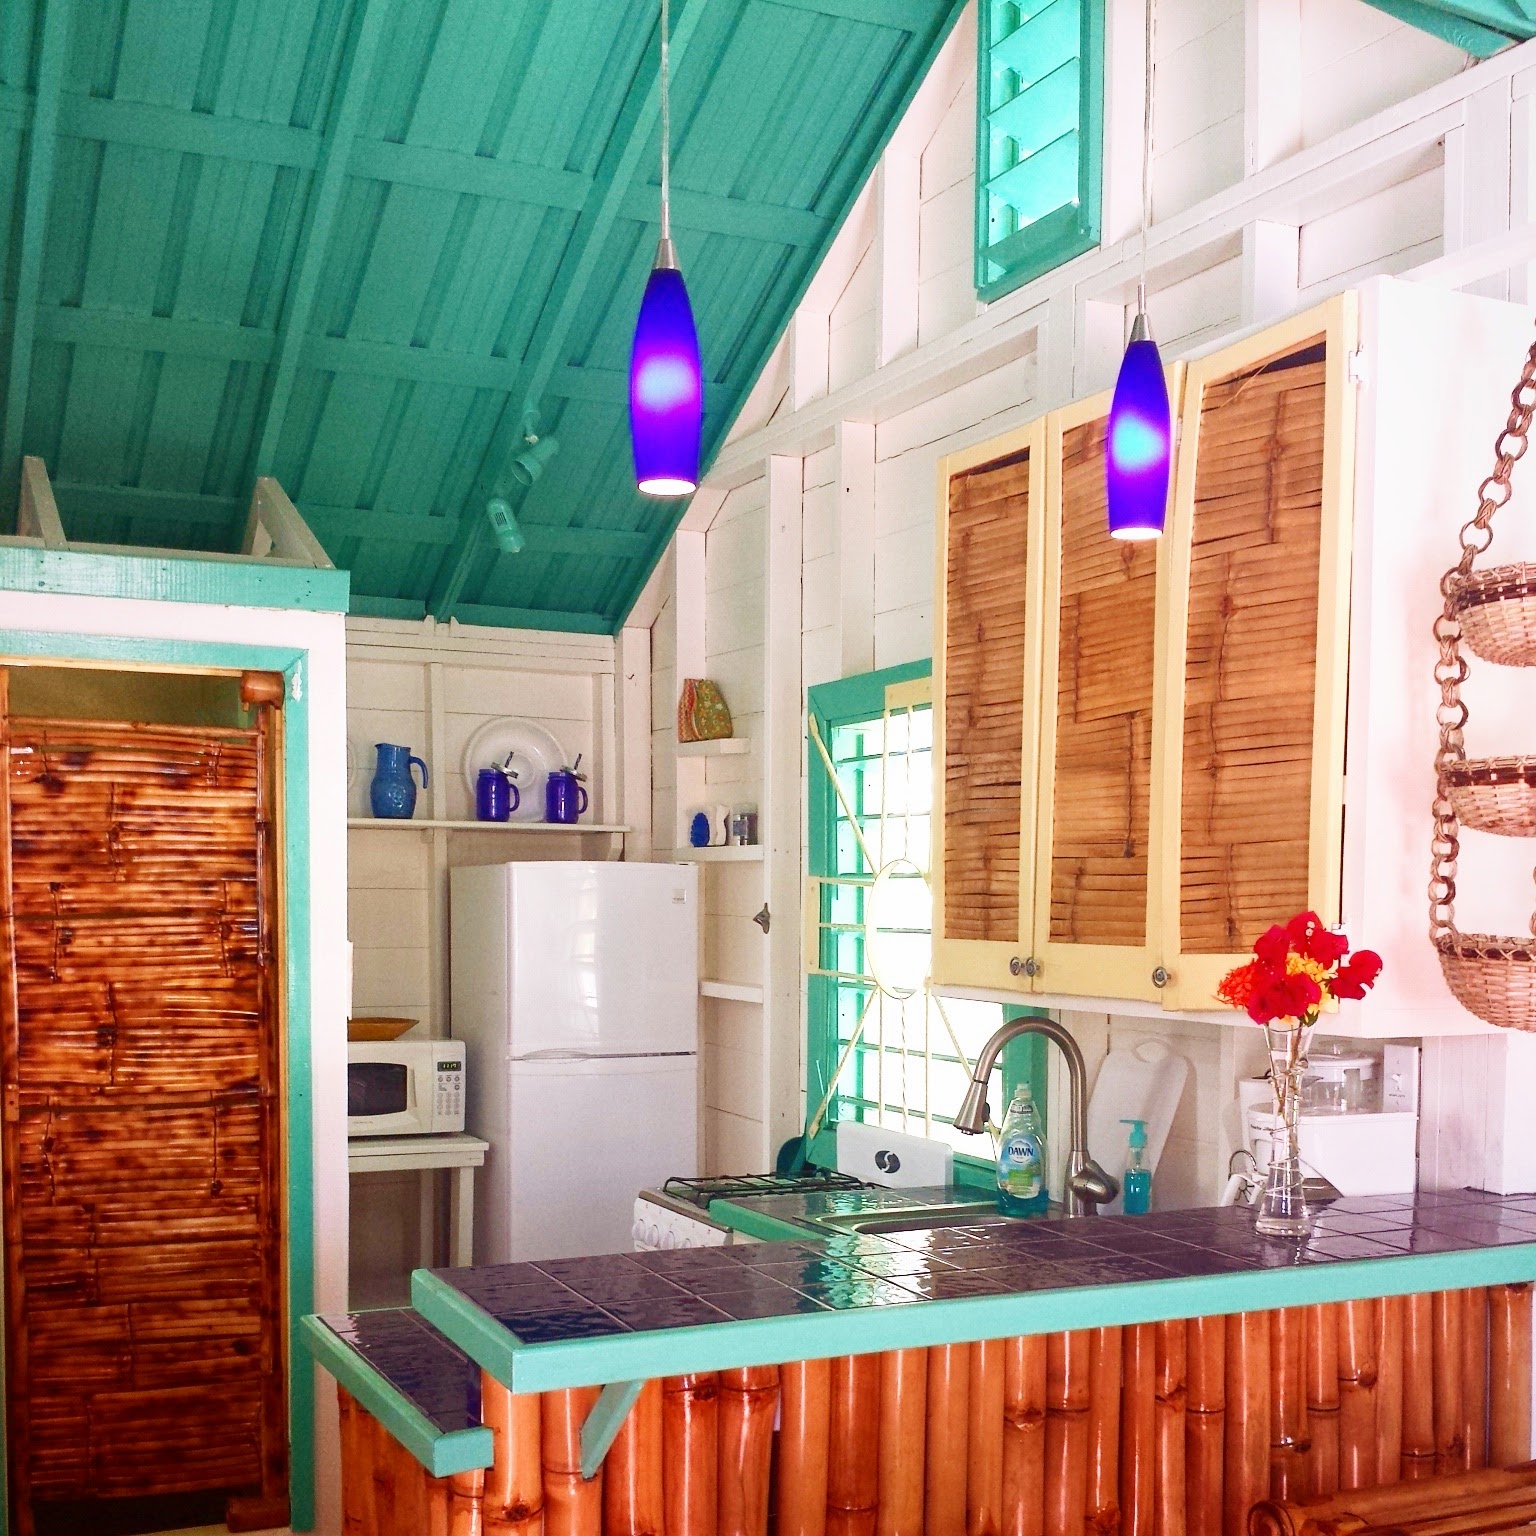 Remax Vip Belize: Opening of our third rental, the Casita